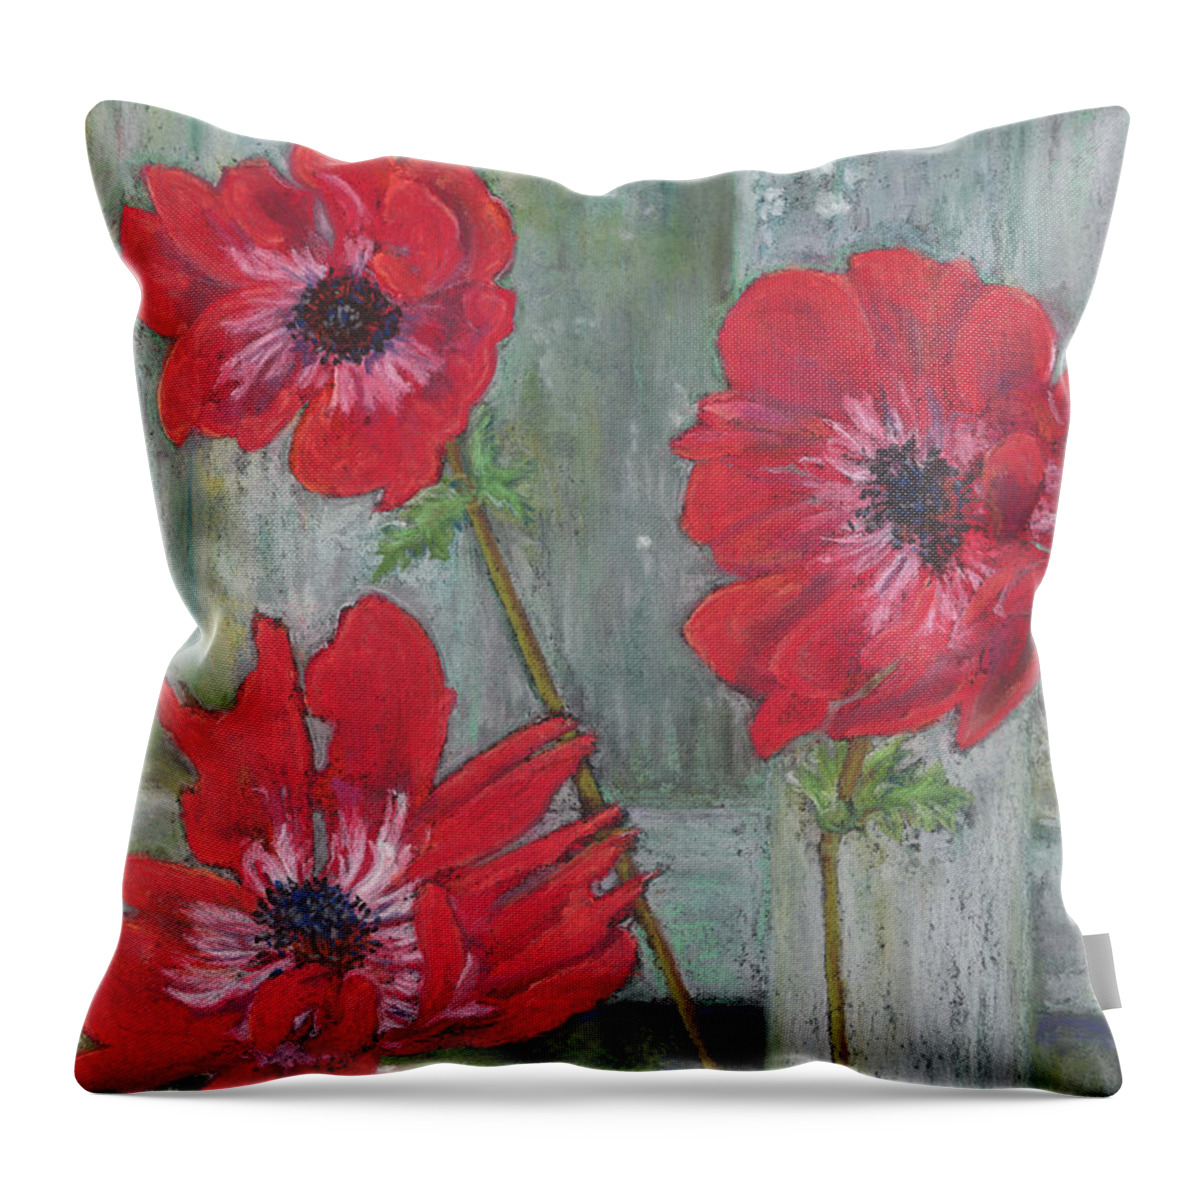 Poppies Throw Pillow featuring the painting Red Poppies #5 by Vicki Baun Barry